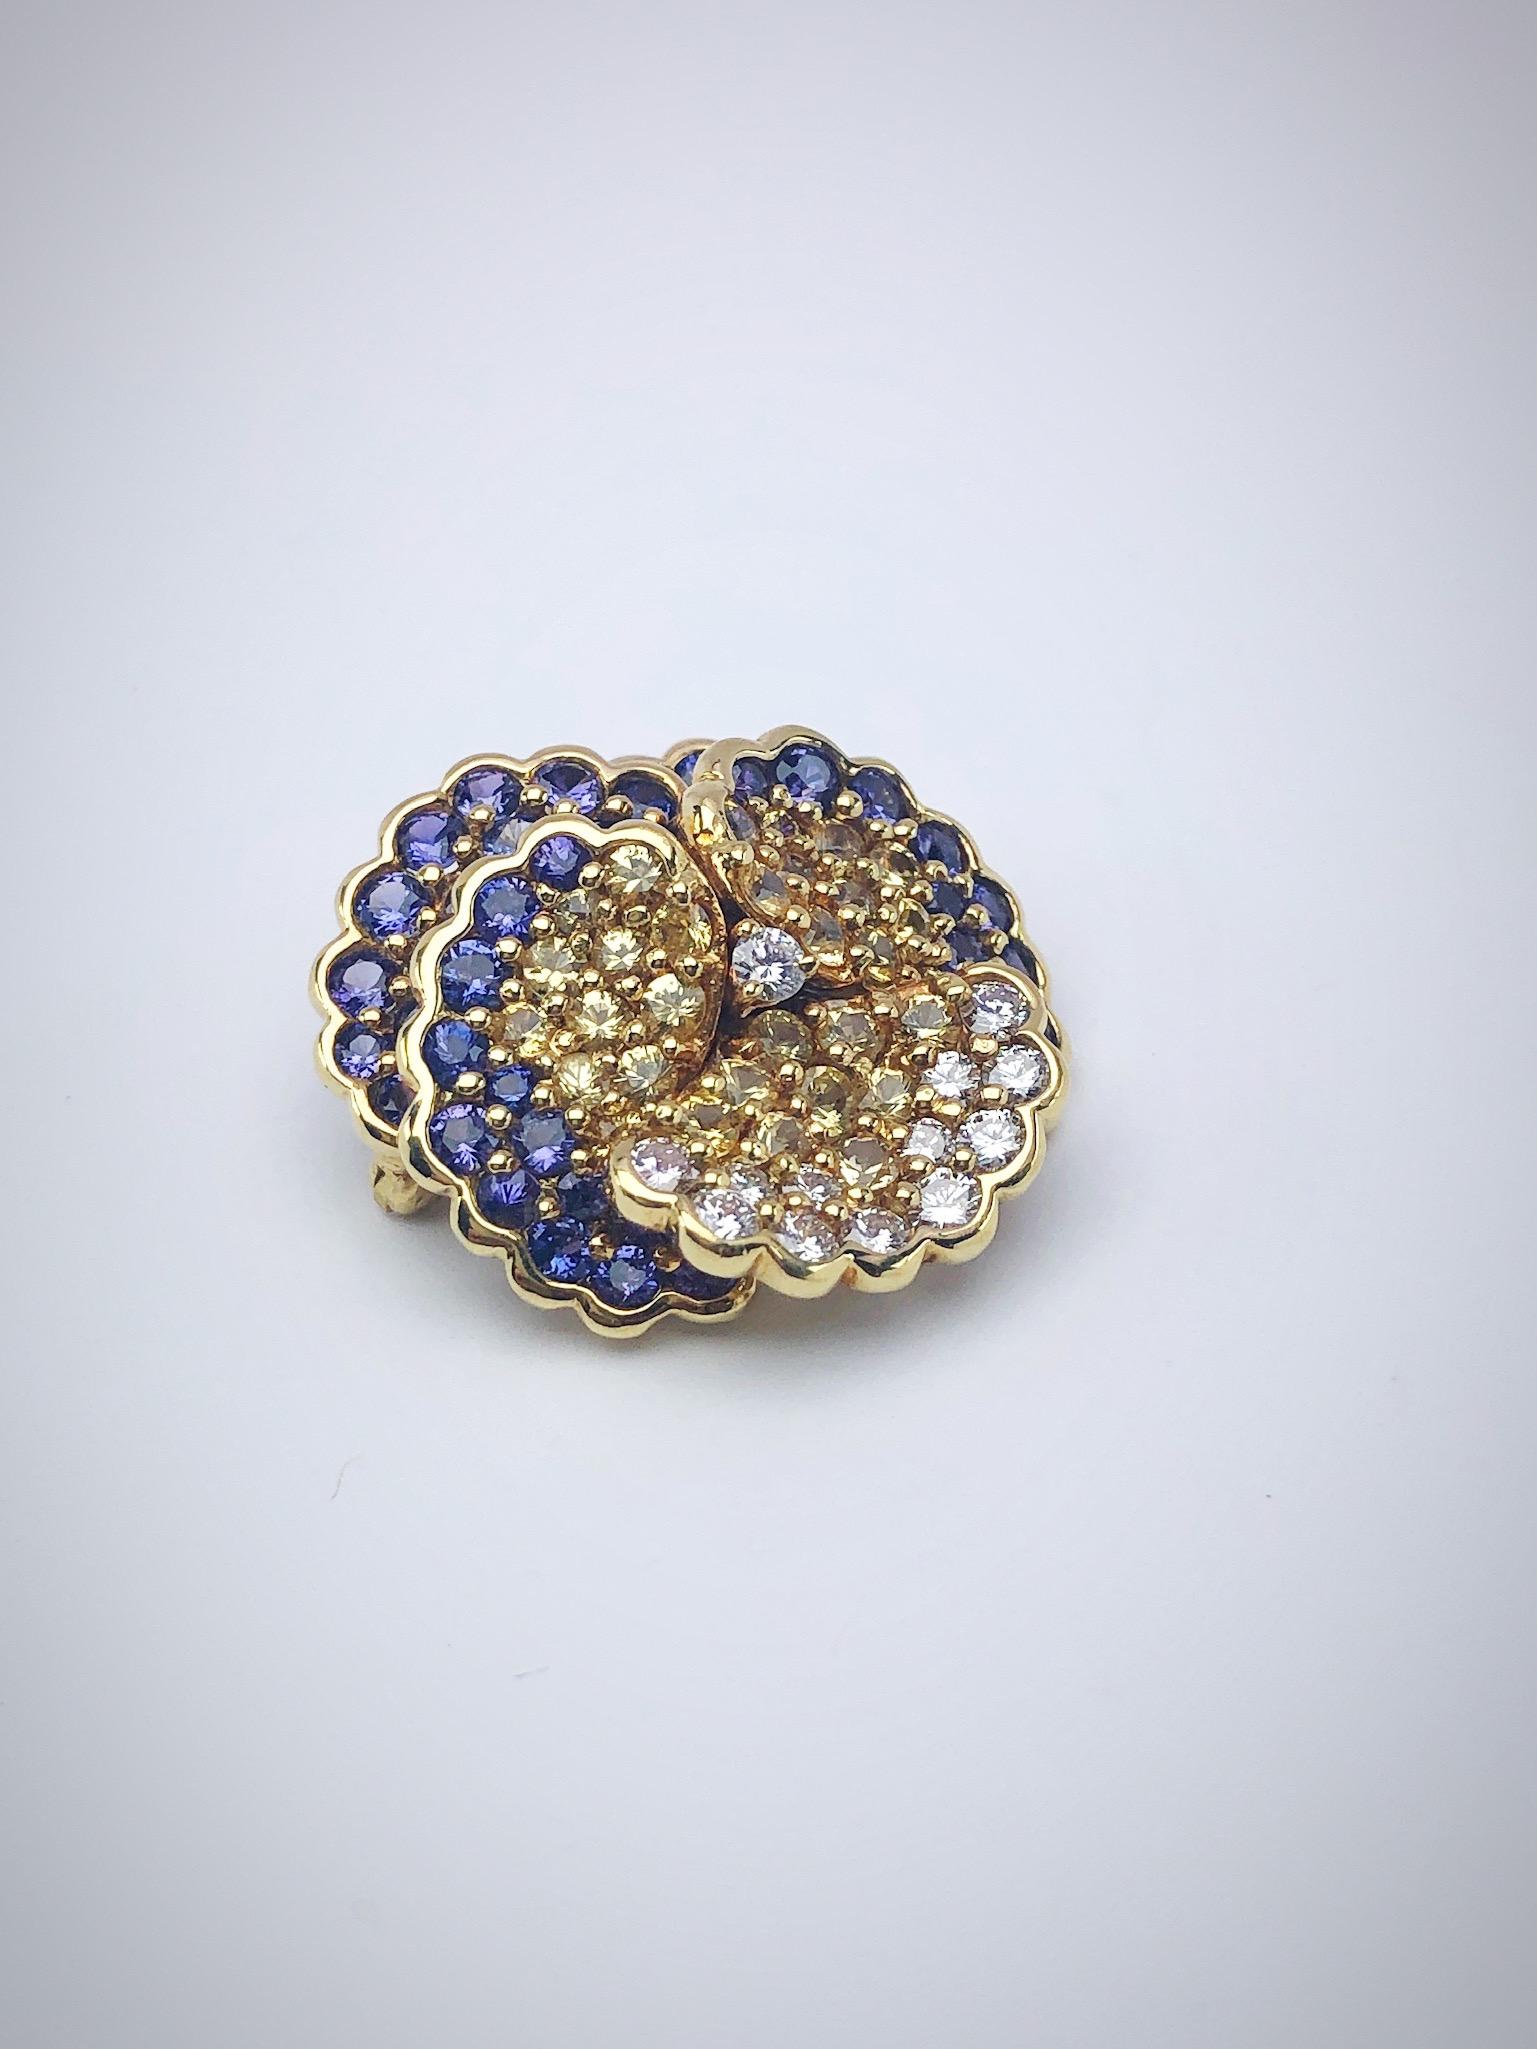 Round Cut Jean Vitau 18 Karat Yellow Gold Pansy Brooch with Diamonds and Colored Sapphires For Sale